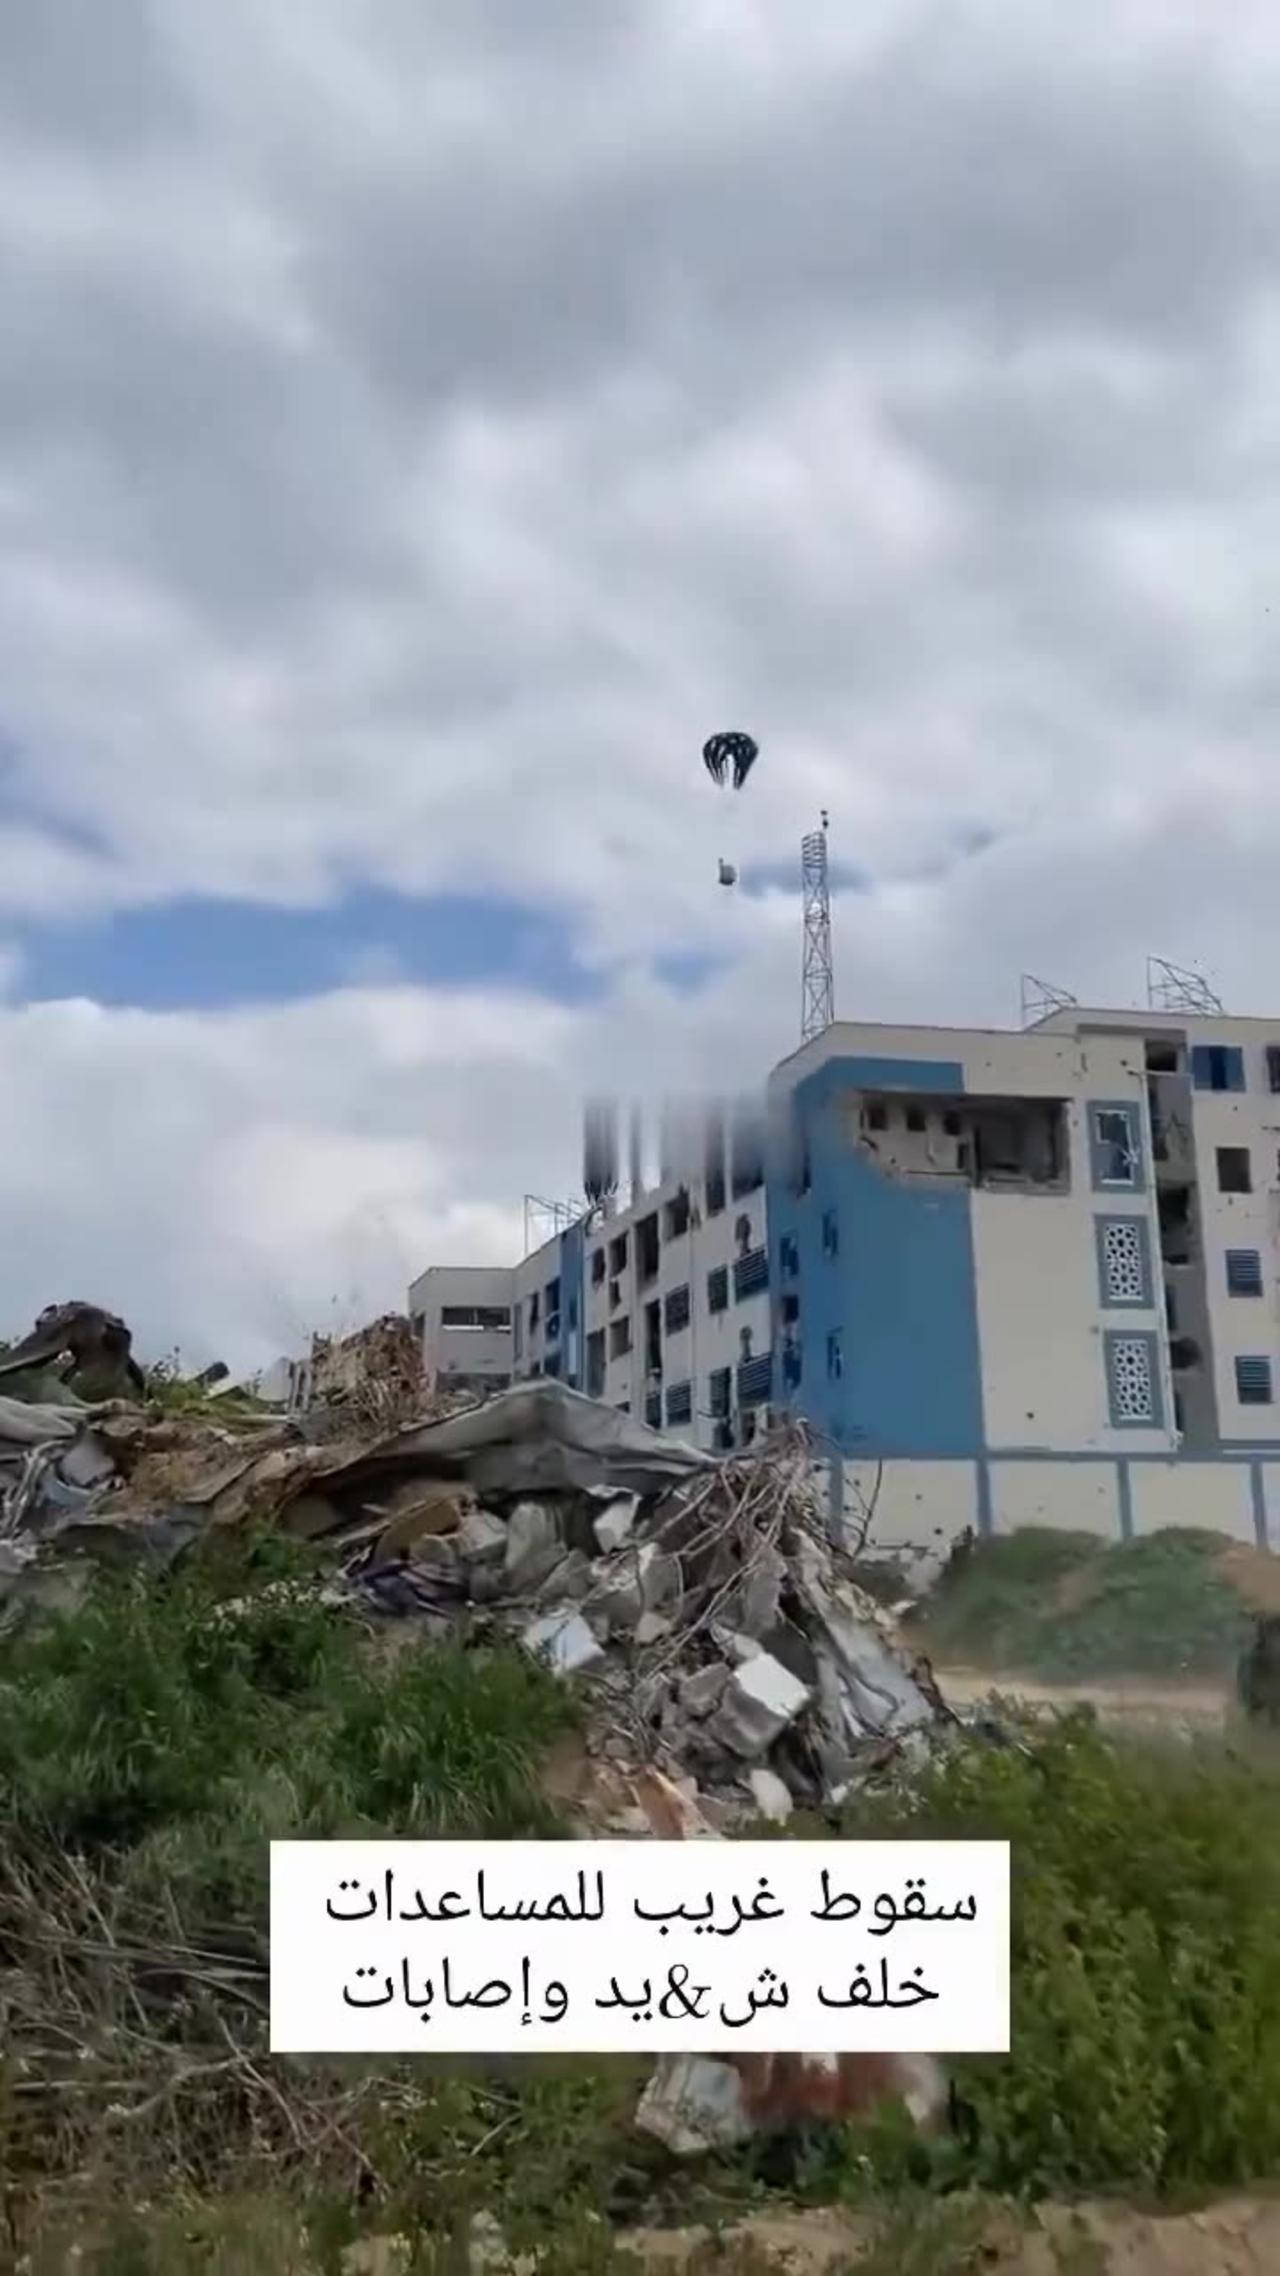 USAF Air-Drop aid to Gazans kills 5 when one parachute fails to open (not graphic)